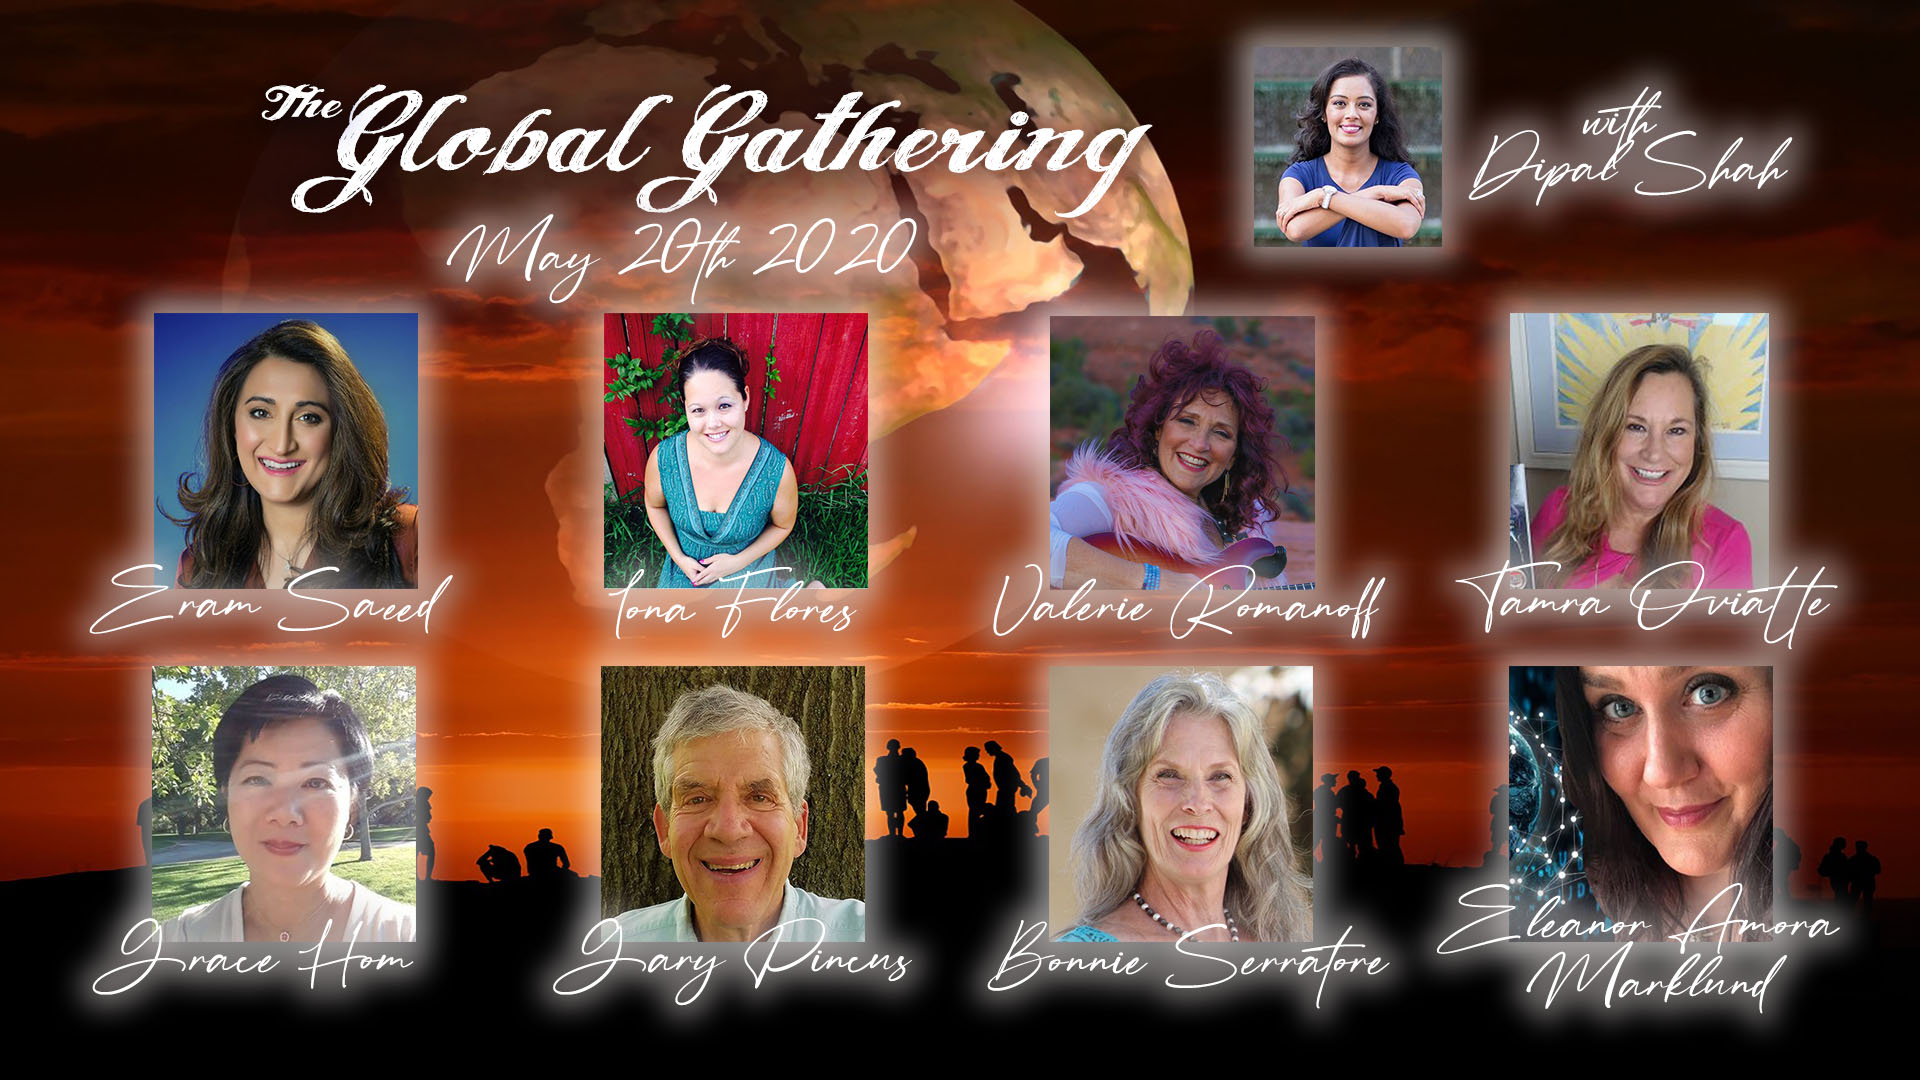 “The Global Gathering” May 20th, 2020